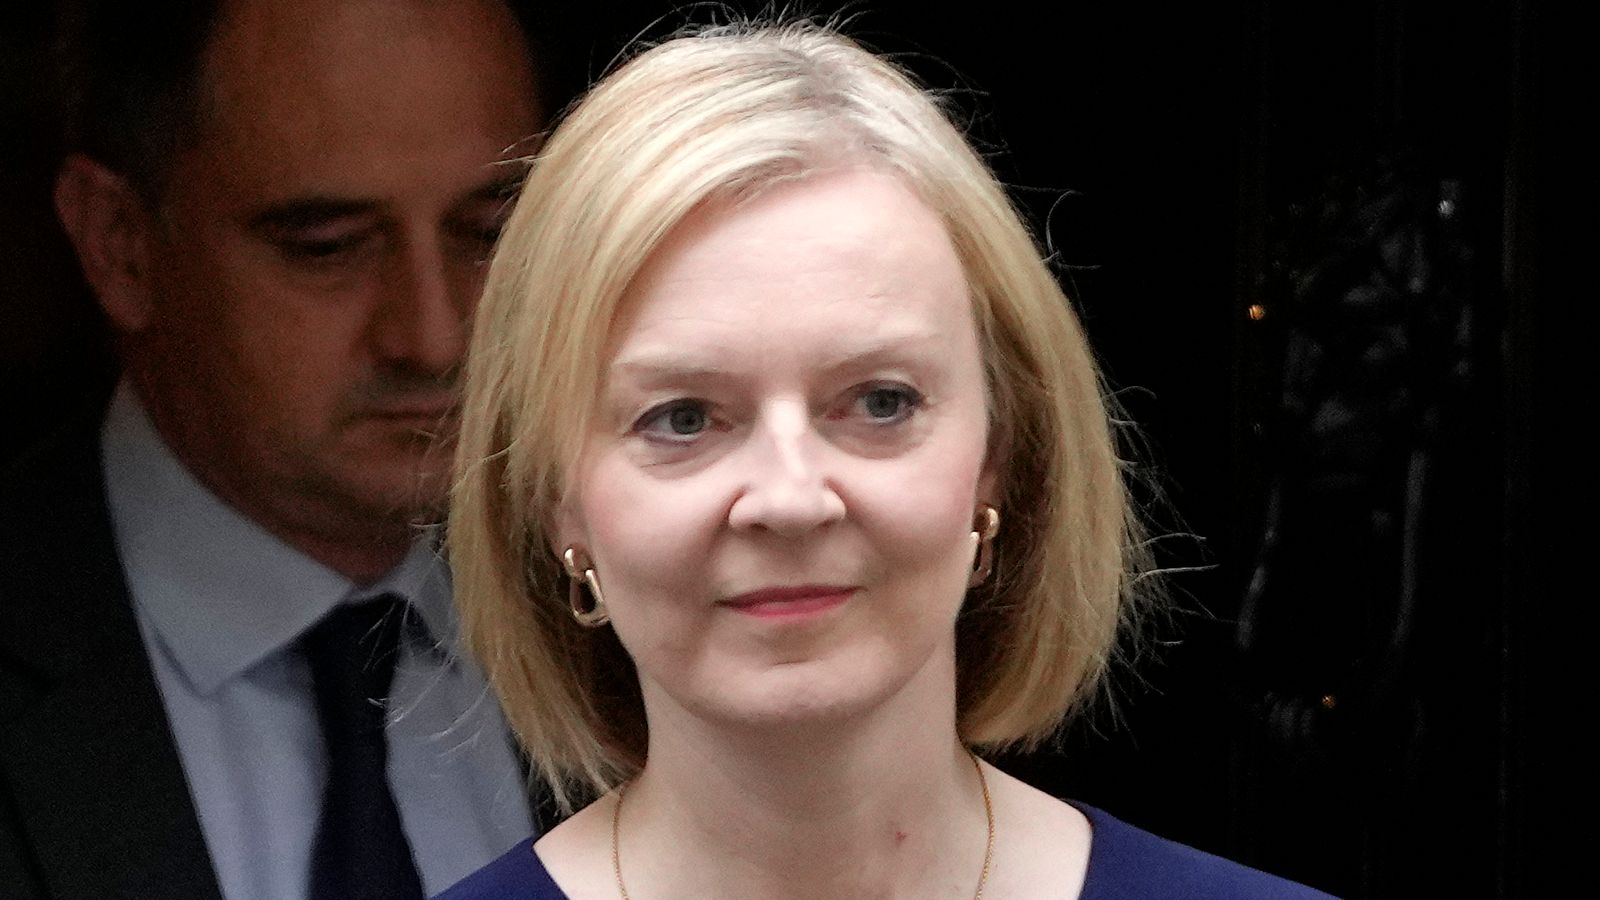 Prime Minister Liz Truss facing fresh battle with senior Tories over benefits squeeze and public spending cuts 